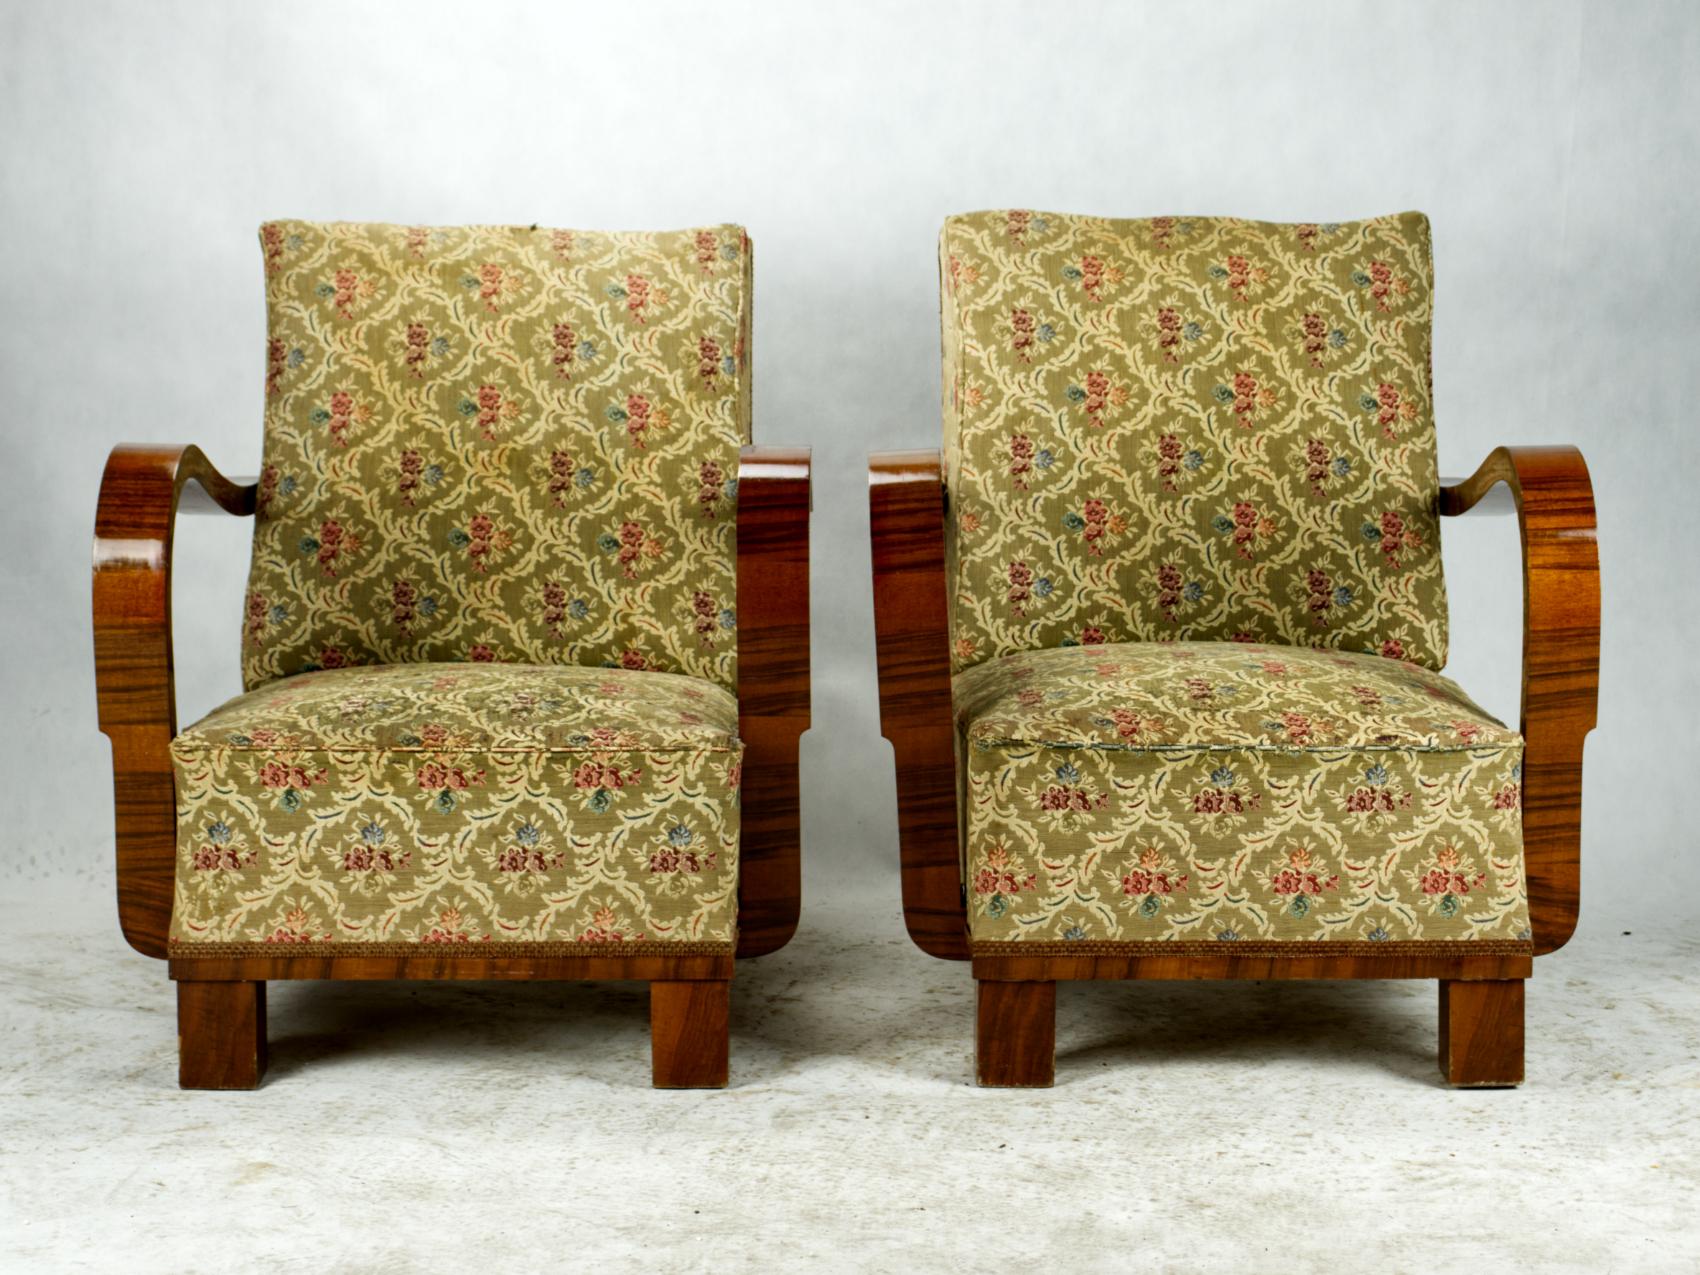 1930s chairs